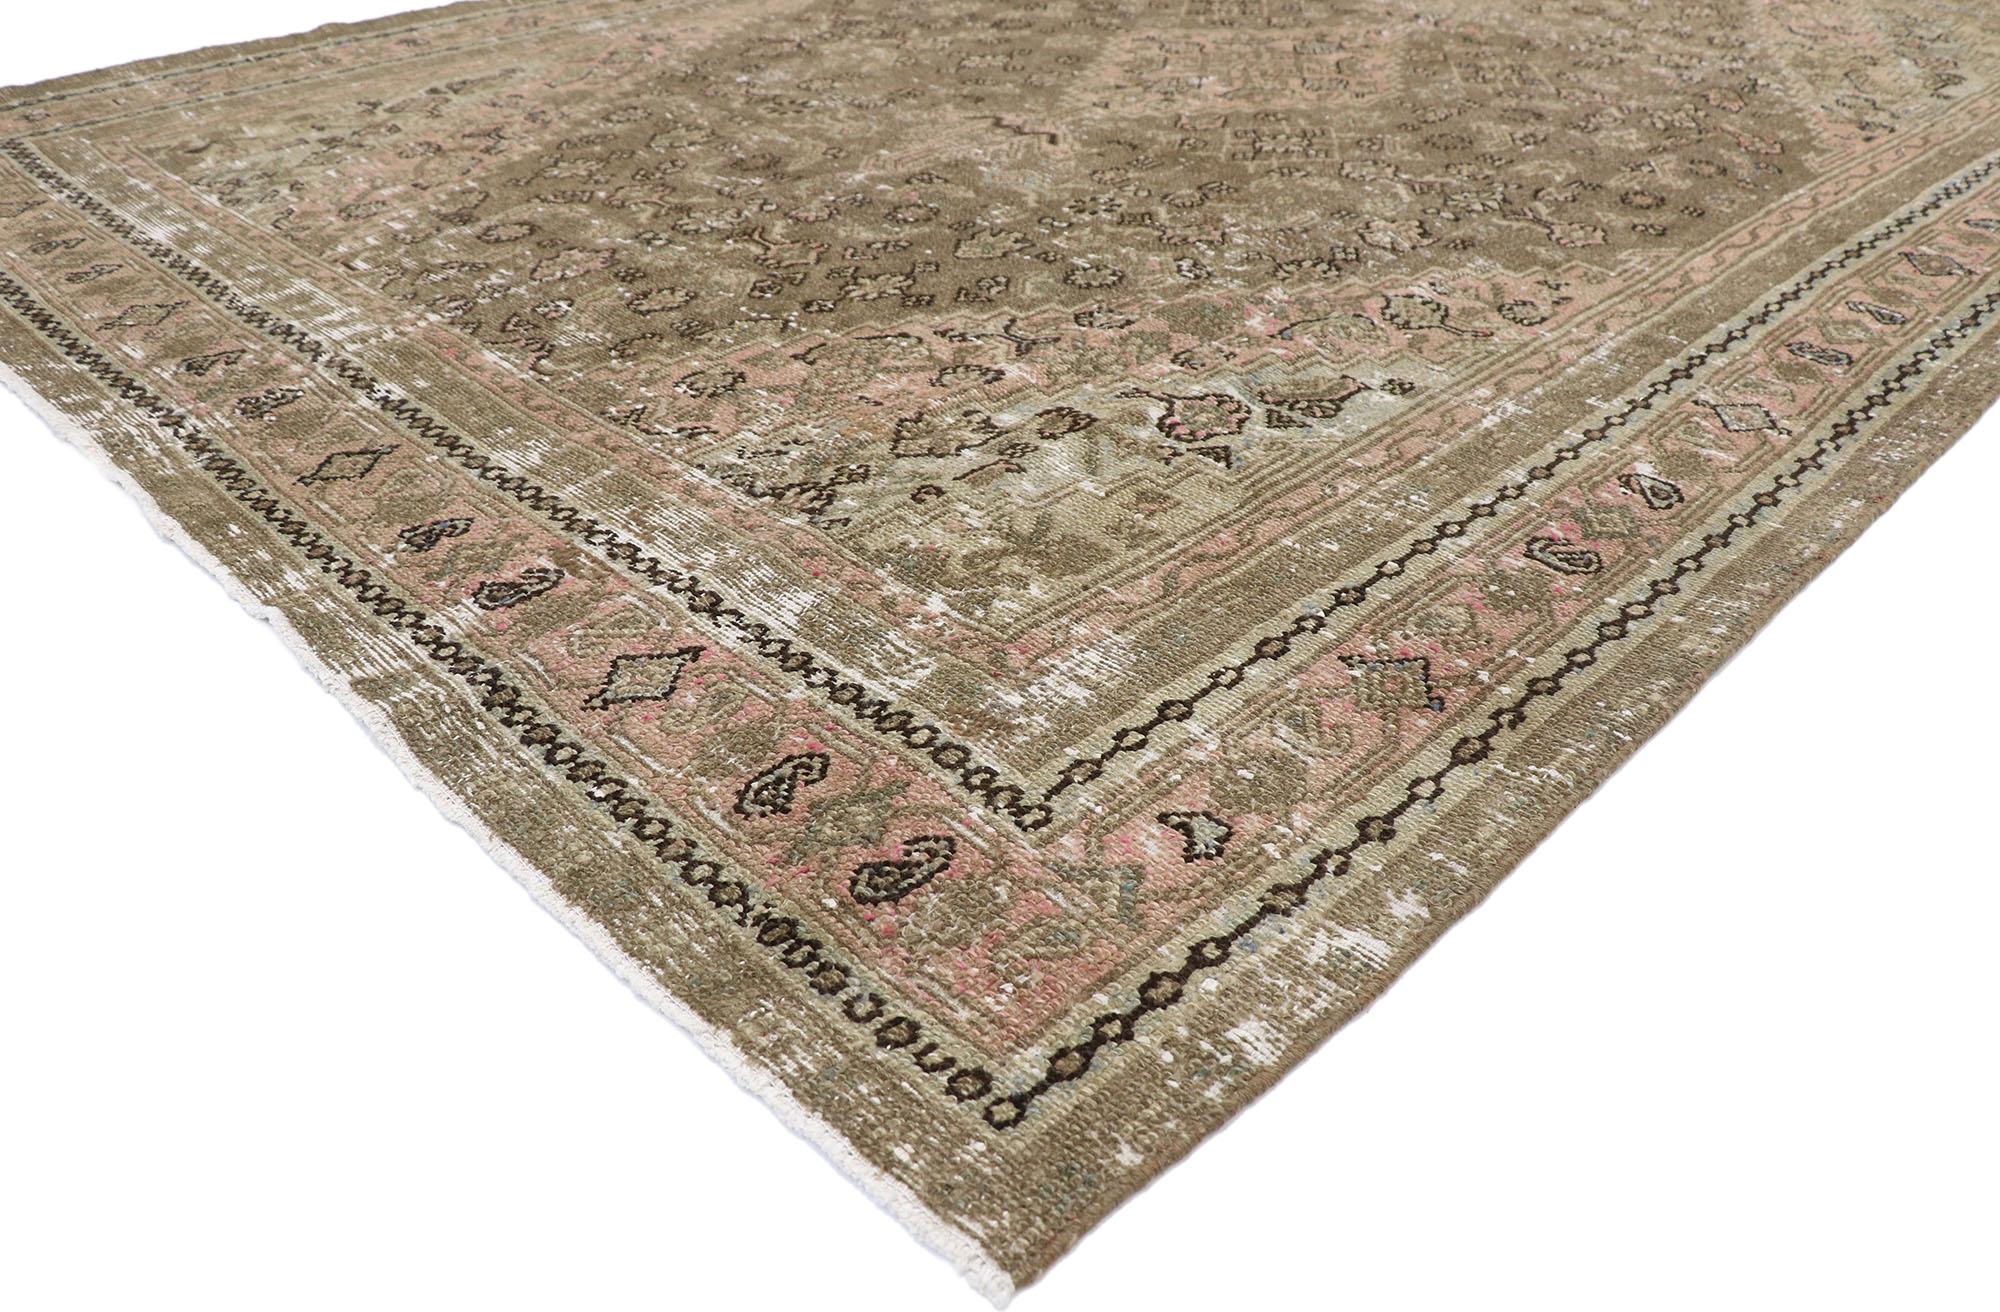 60851, distressed antique Persian Joshegan rug with Rustic Arts & Crafts style. With ornate details and a lovingly time-worn composition, this hand knotted wool distressed antique Persian Joshegan rug is poised to impress. The abrashed taupe field